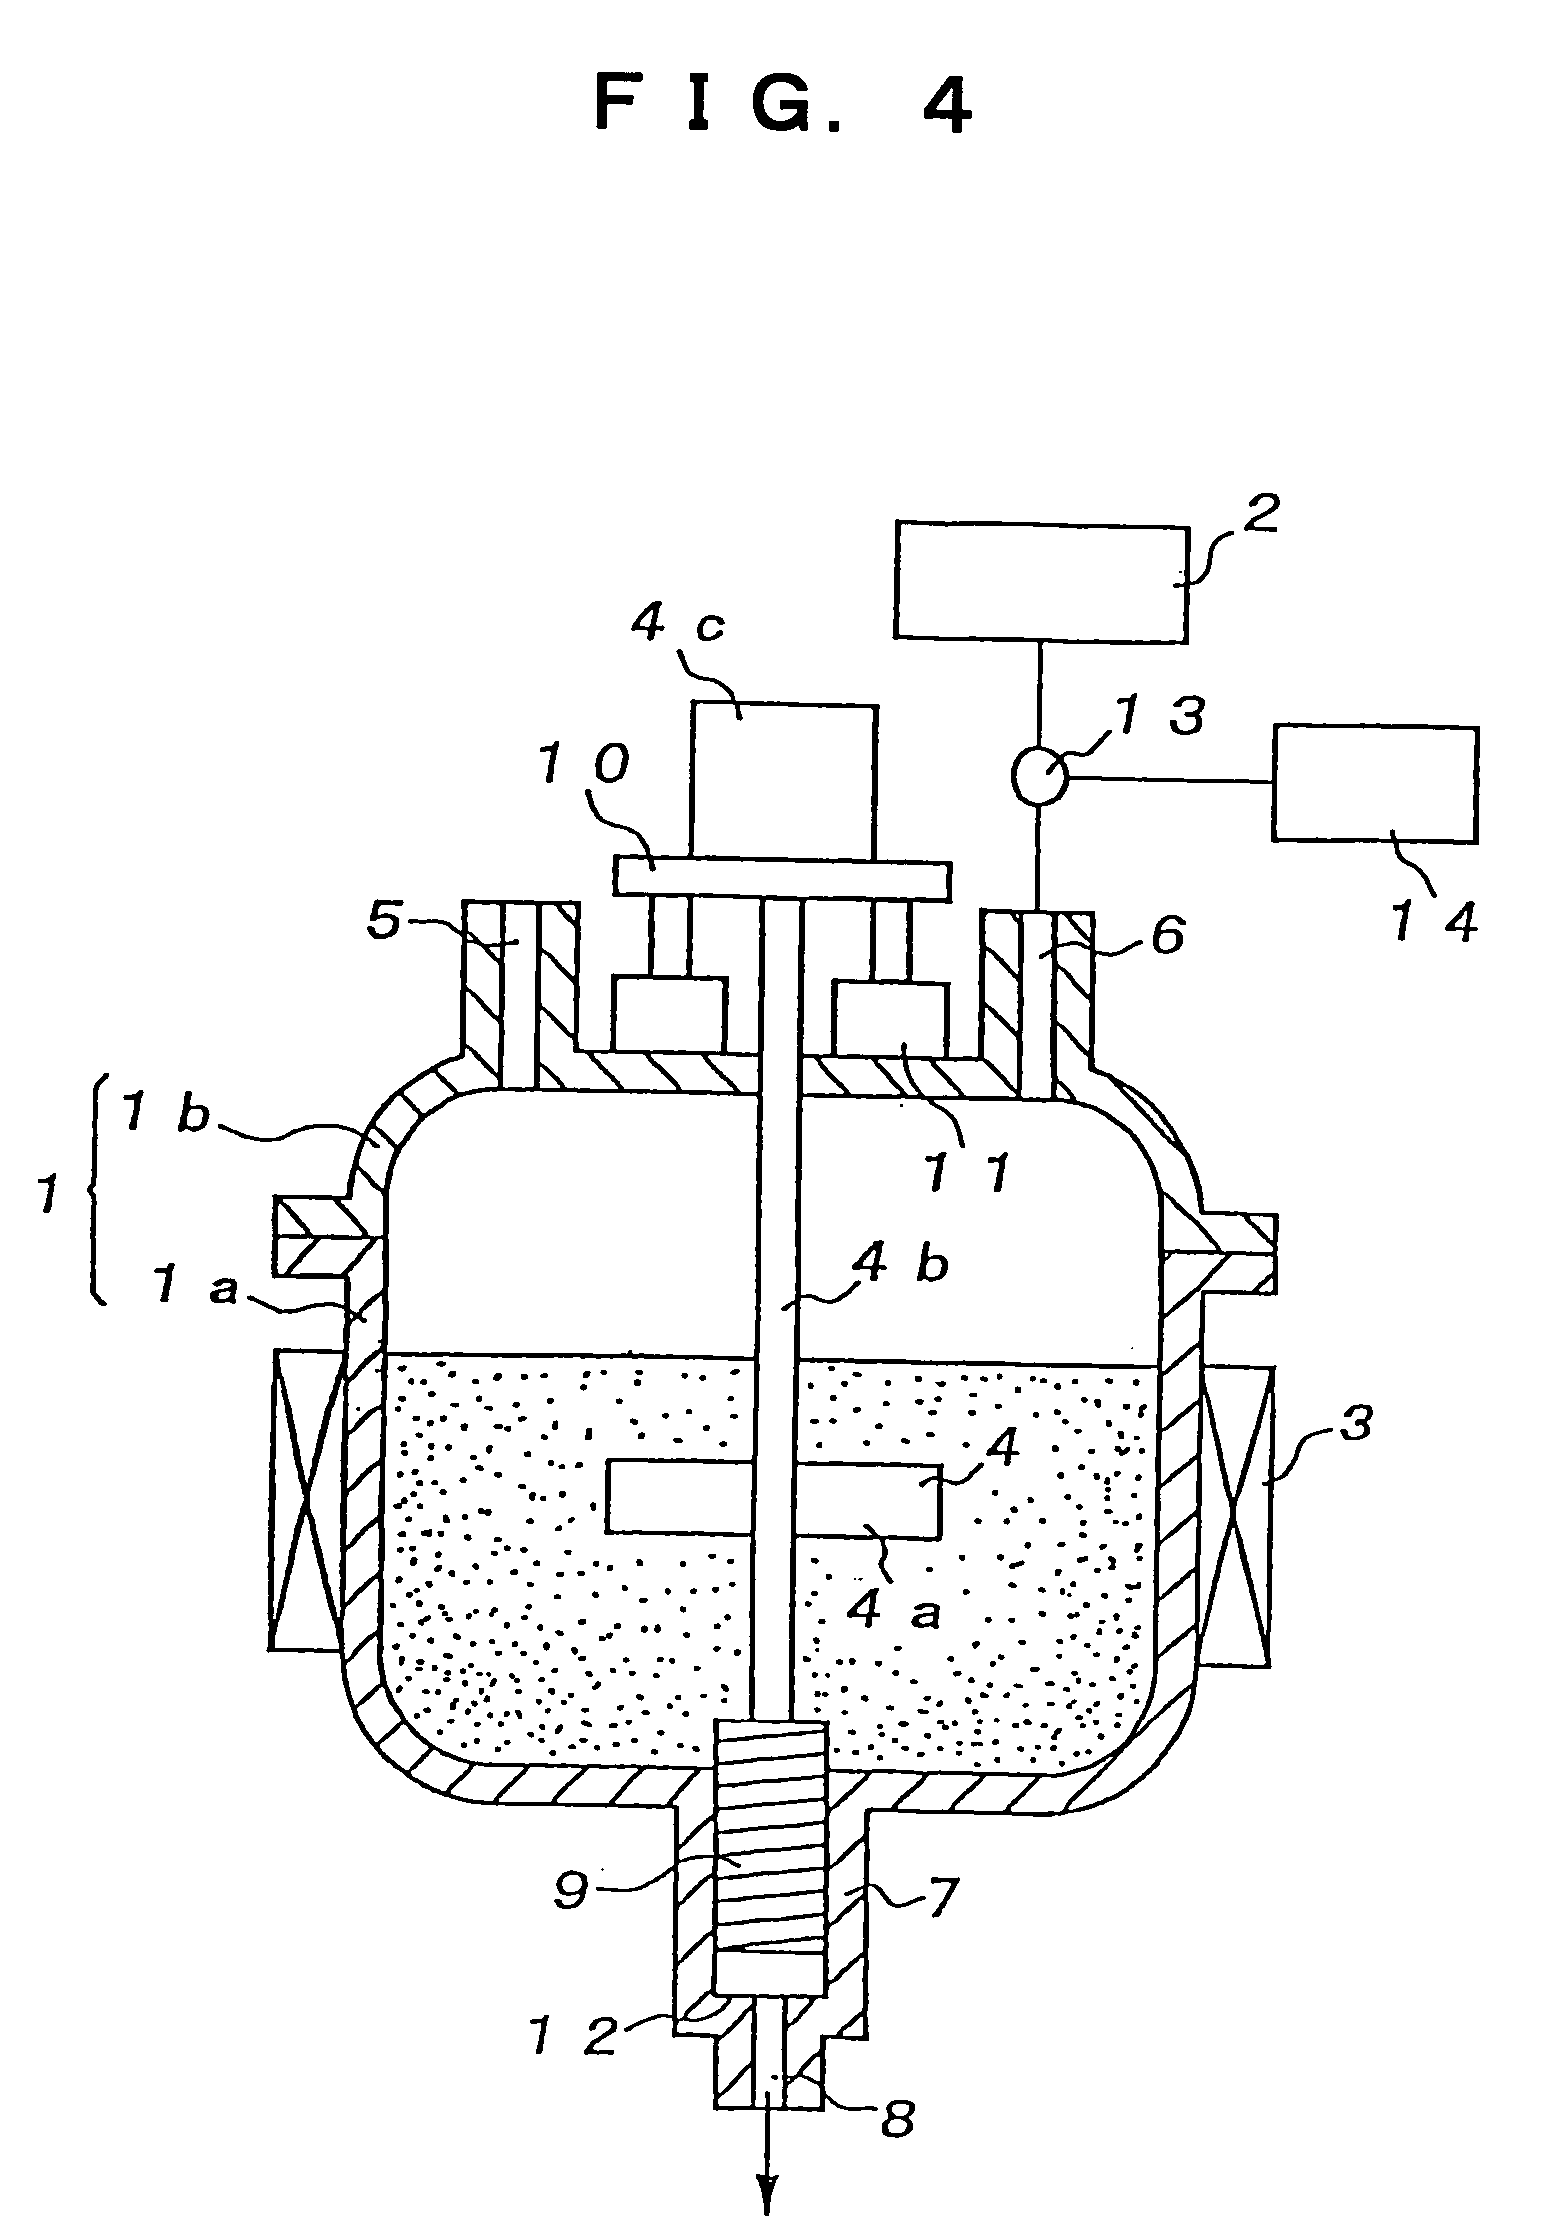 Production method of biodegradable plastic and apparatus for use in production thereof